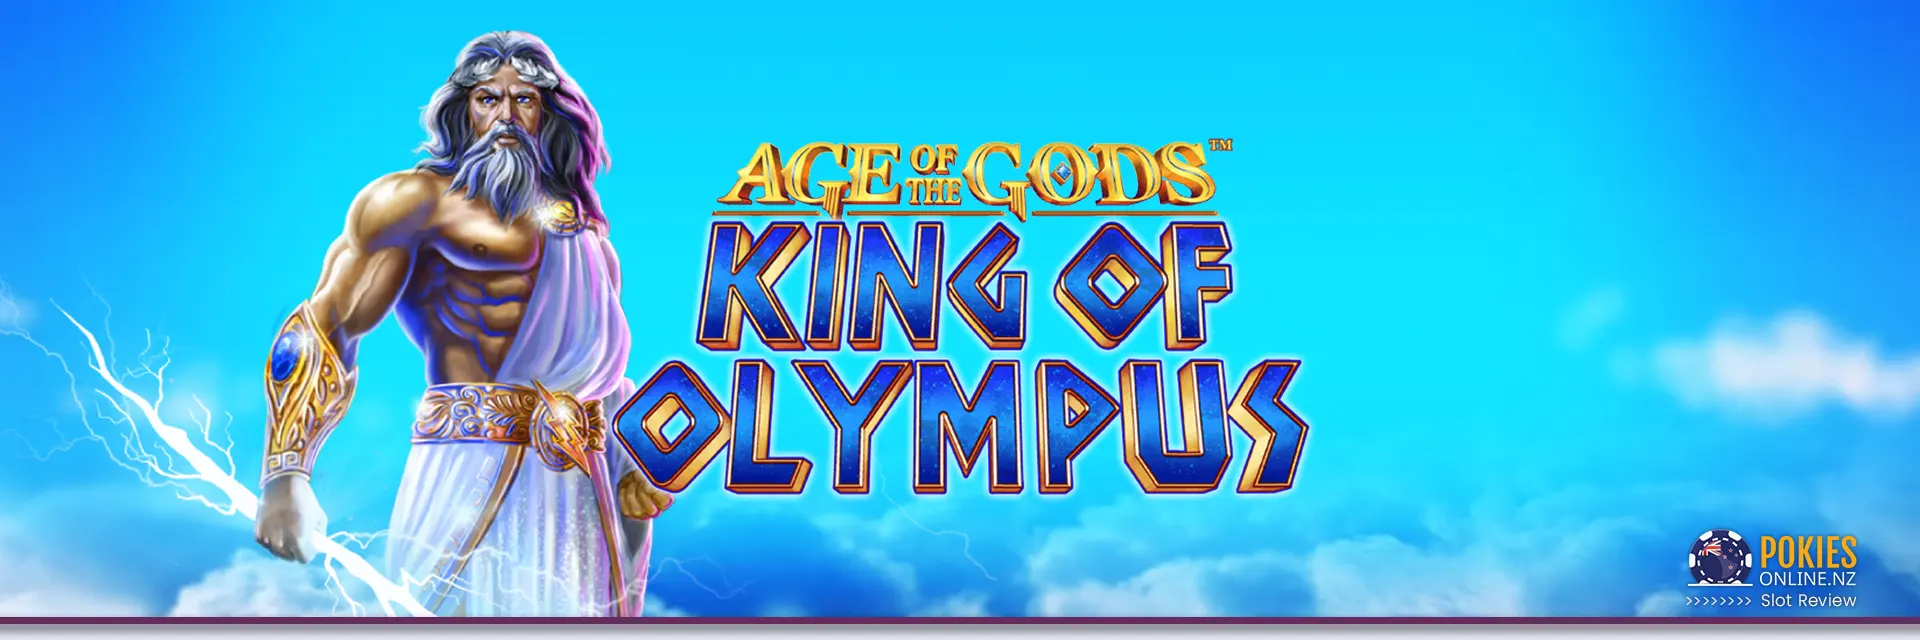 Age of gods king of Olympus slot banner